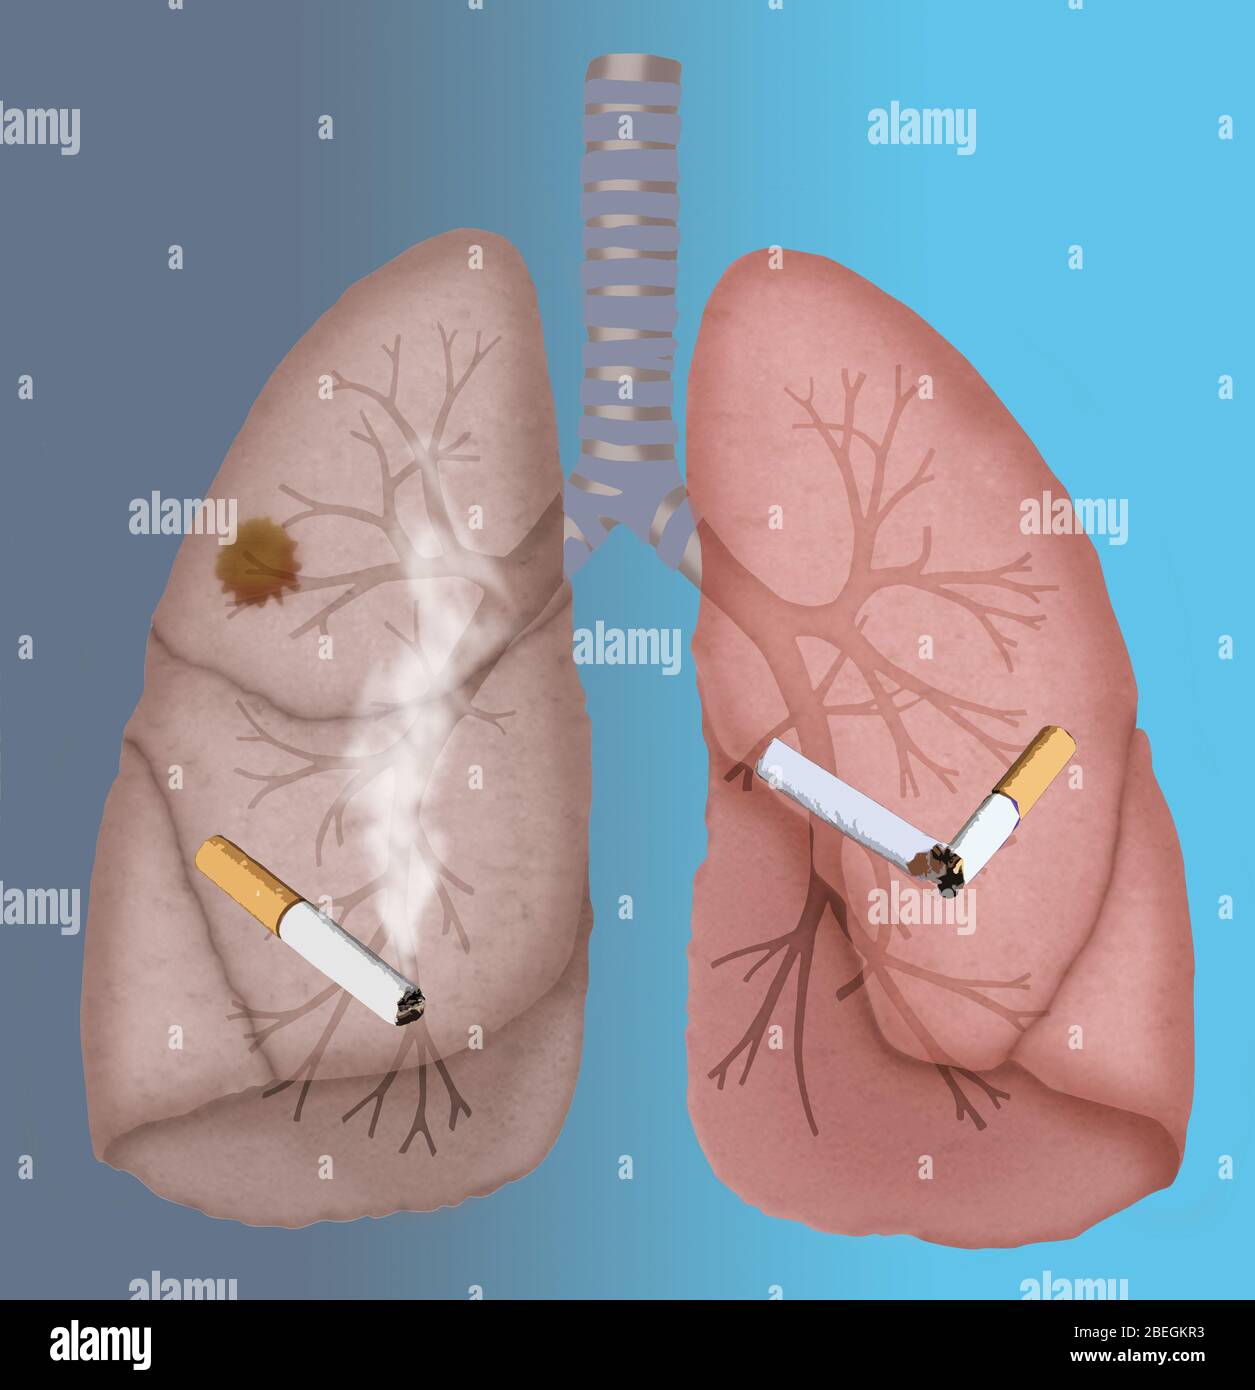 Healthy and Cancerous Lungs Stock Photo